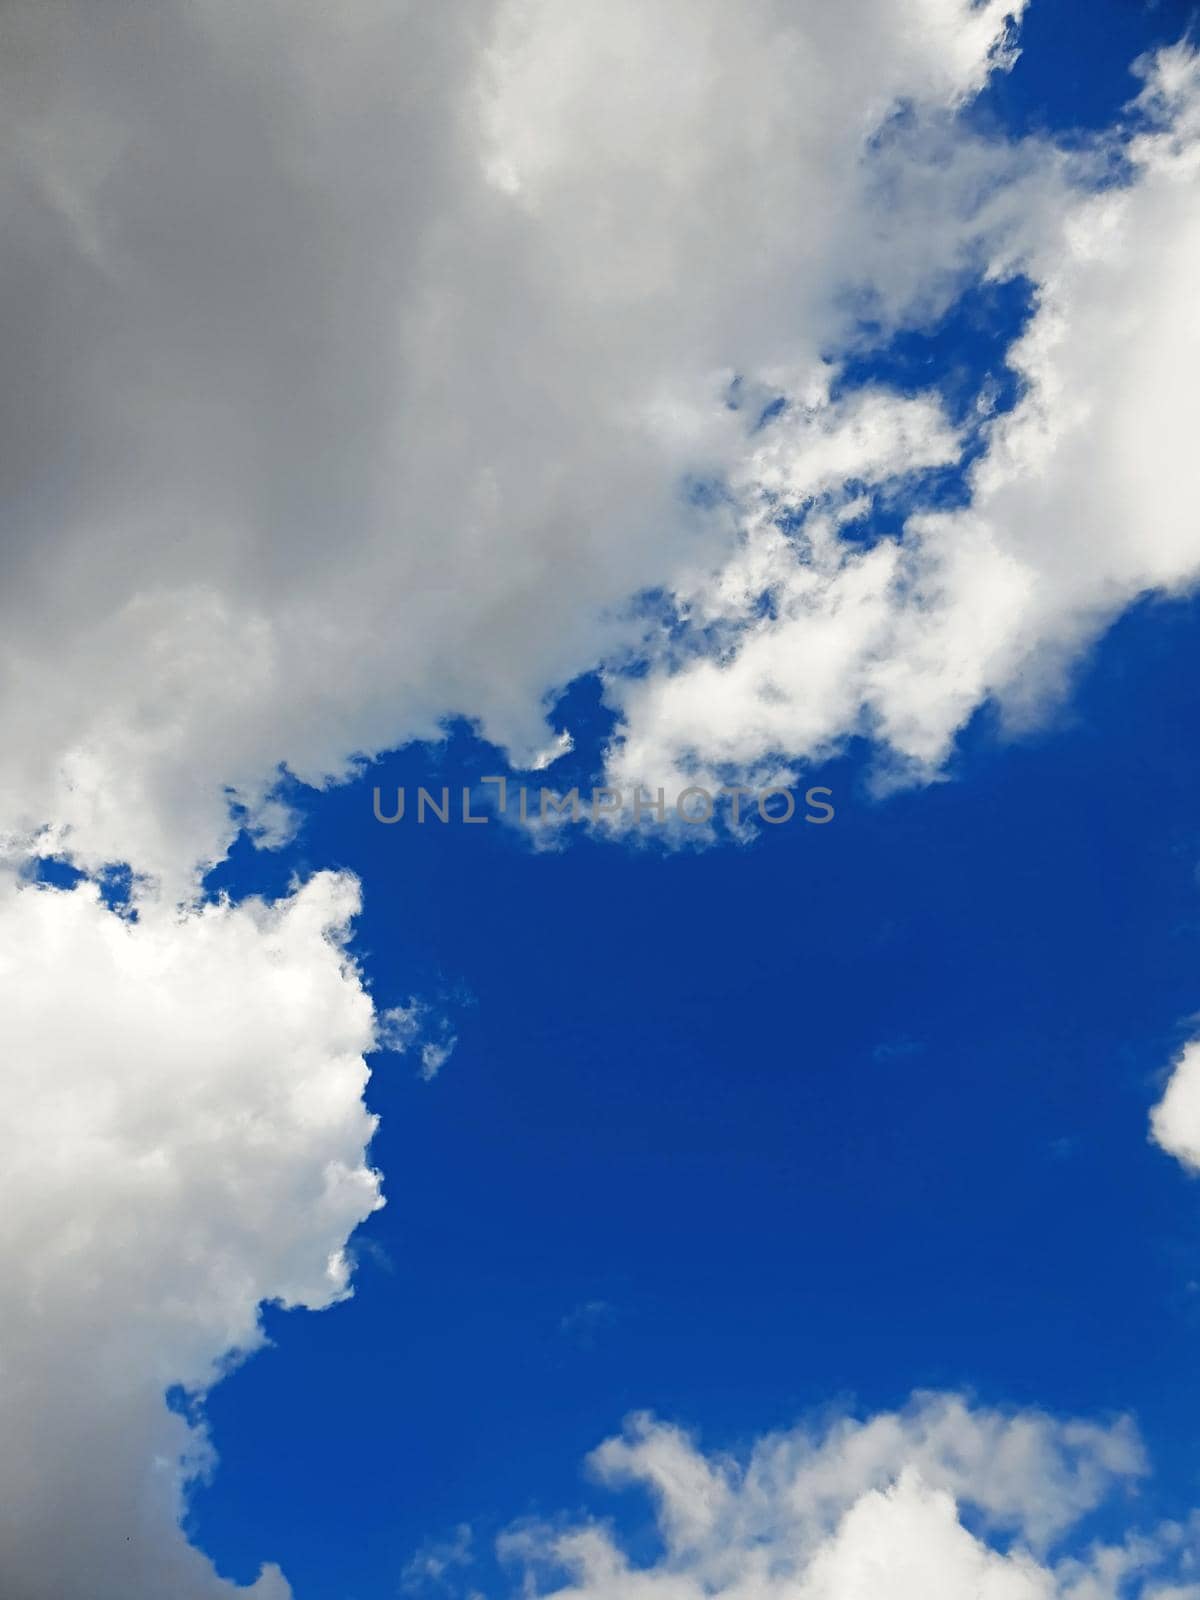 White clouds against the blue sky, vertical image oriented. White clouds on clear blue sky, bottom view. Full frame background with sky and clouds.